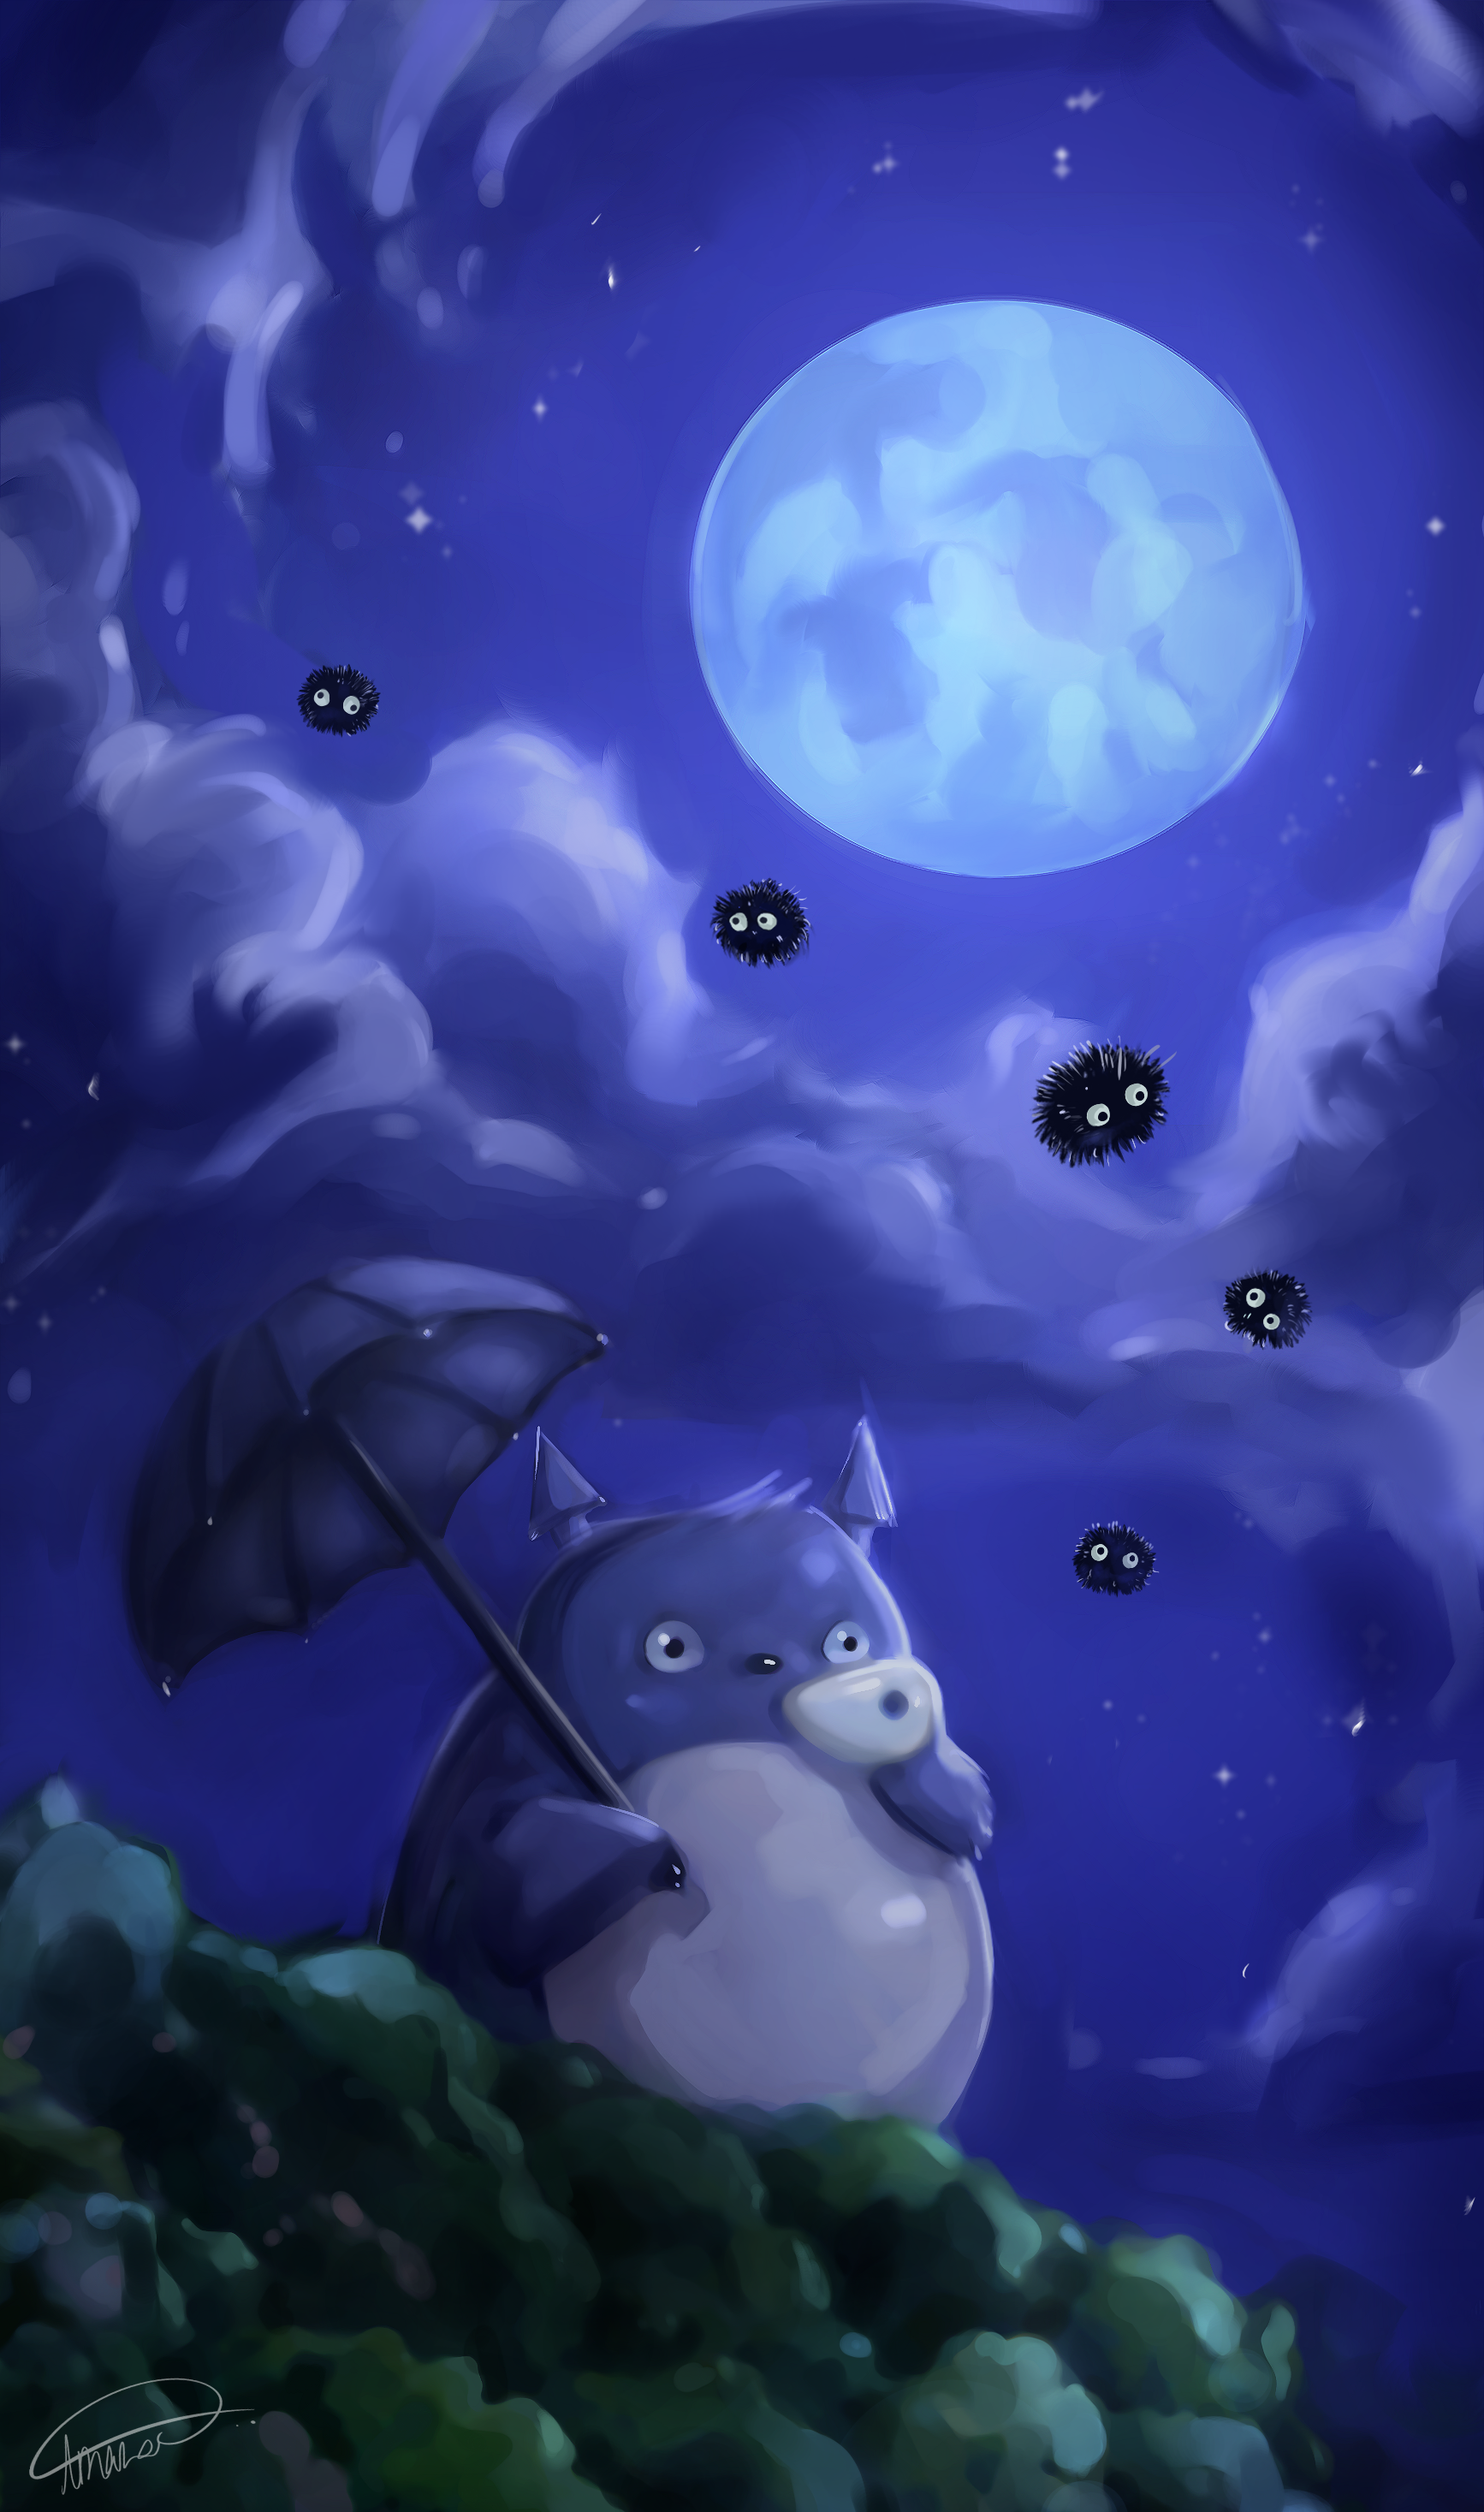 I made a Totoro wallpaper for your phone rghibli